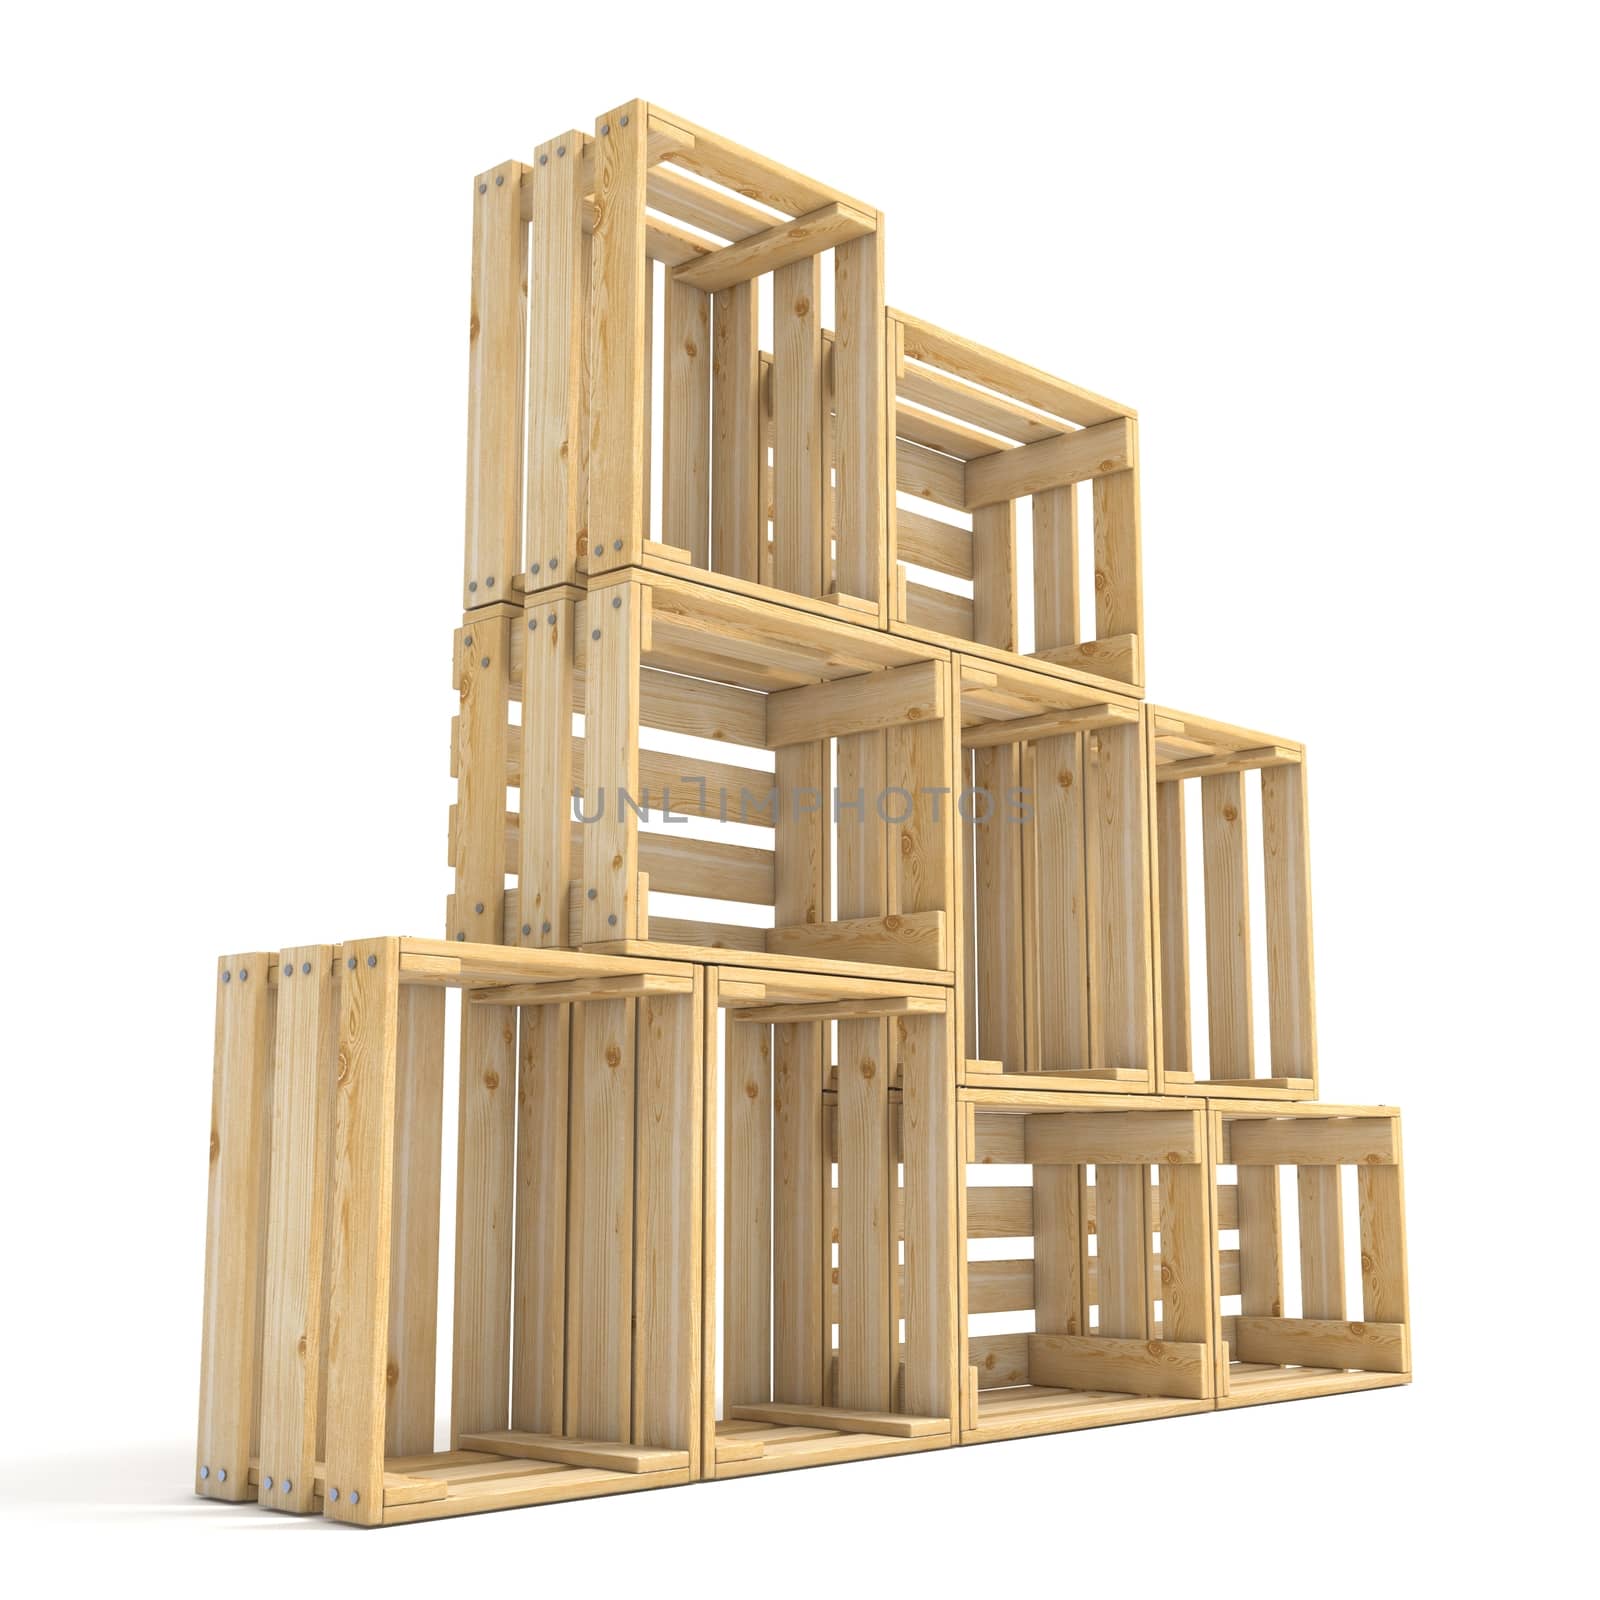 Empty wooden crates arranged Side view 3D by djmilic